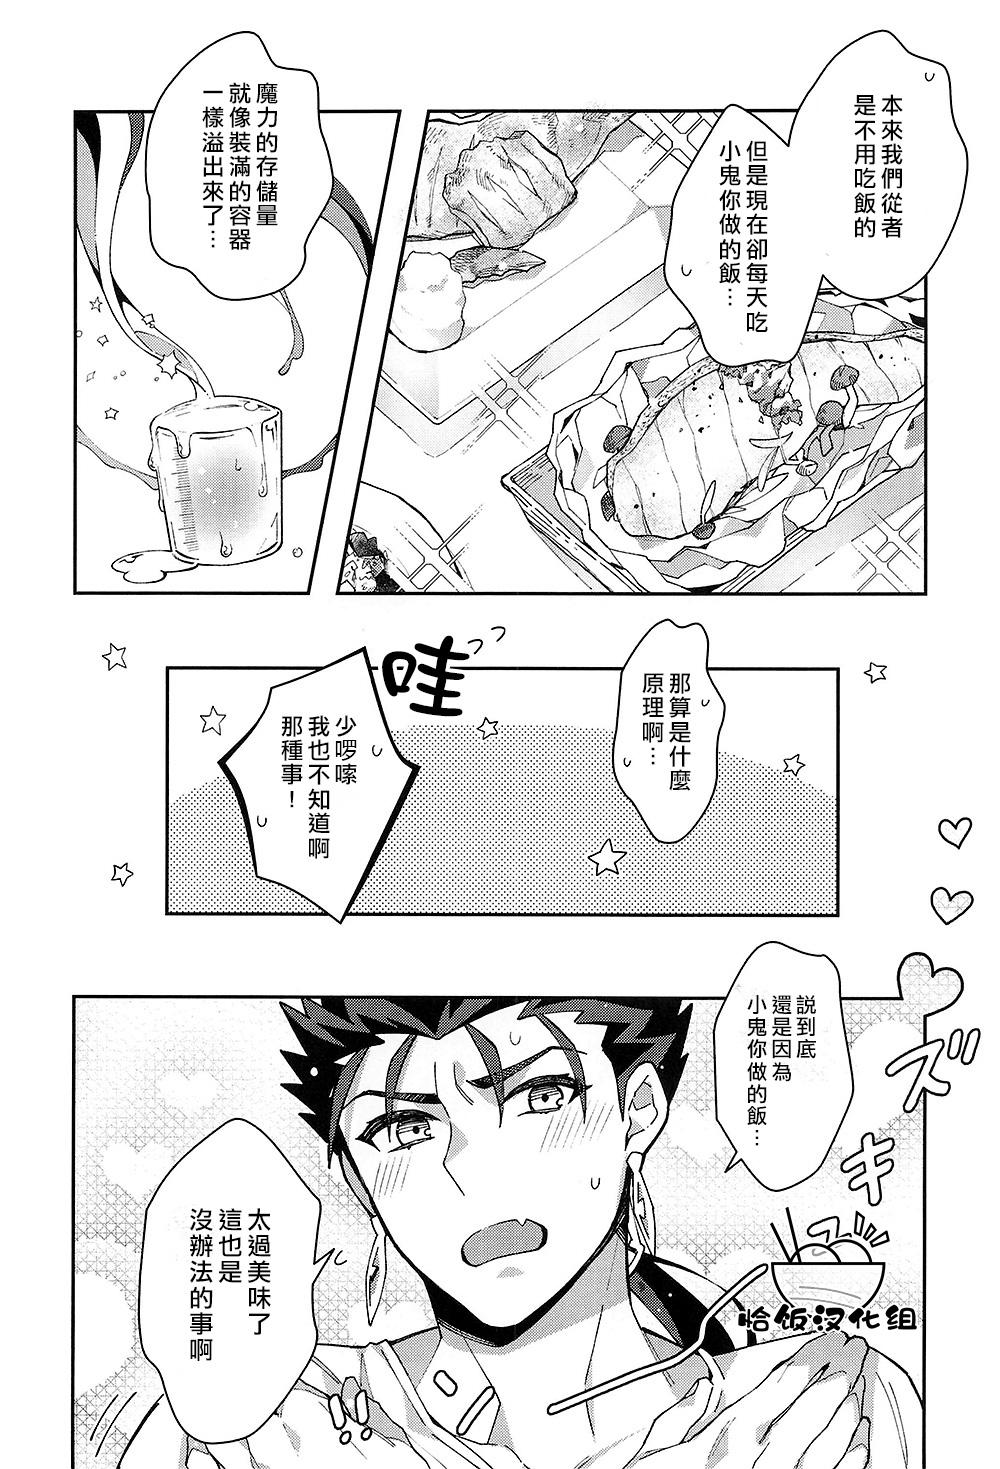 Oldyoung 坊主の飯が美味いせいで乳から魔力がとまらない！ - Fate stay night Black Cock - Page 7